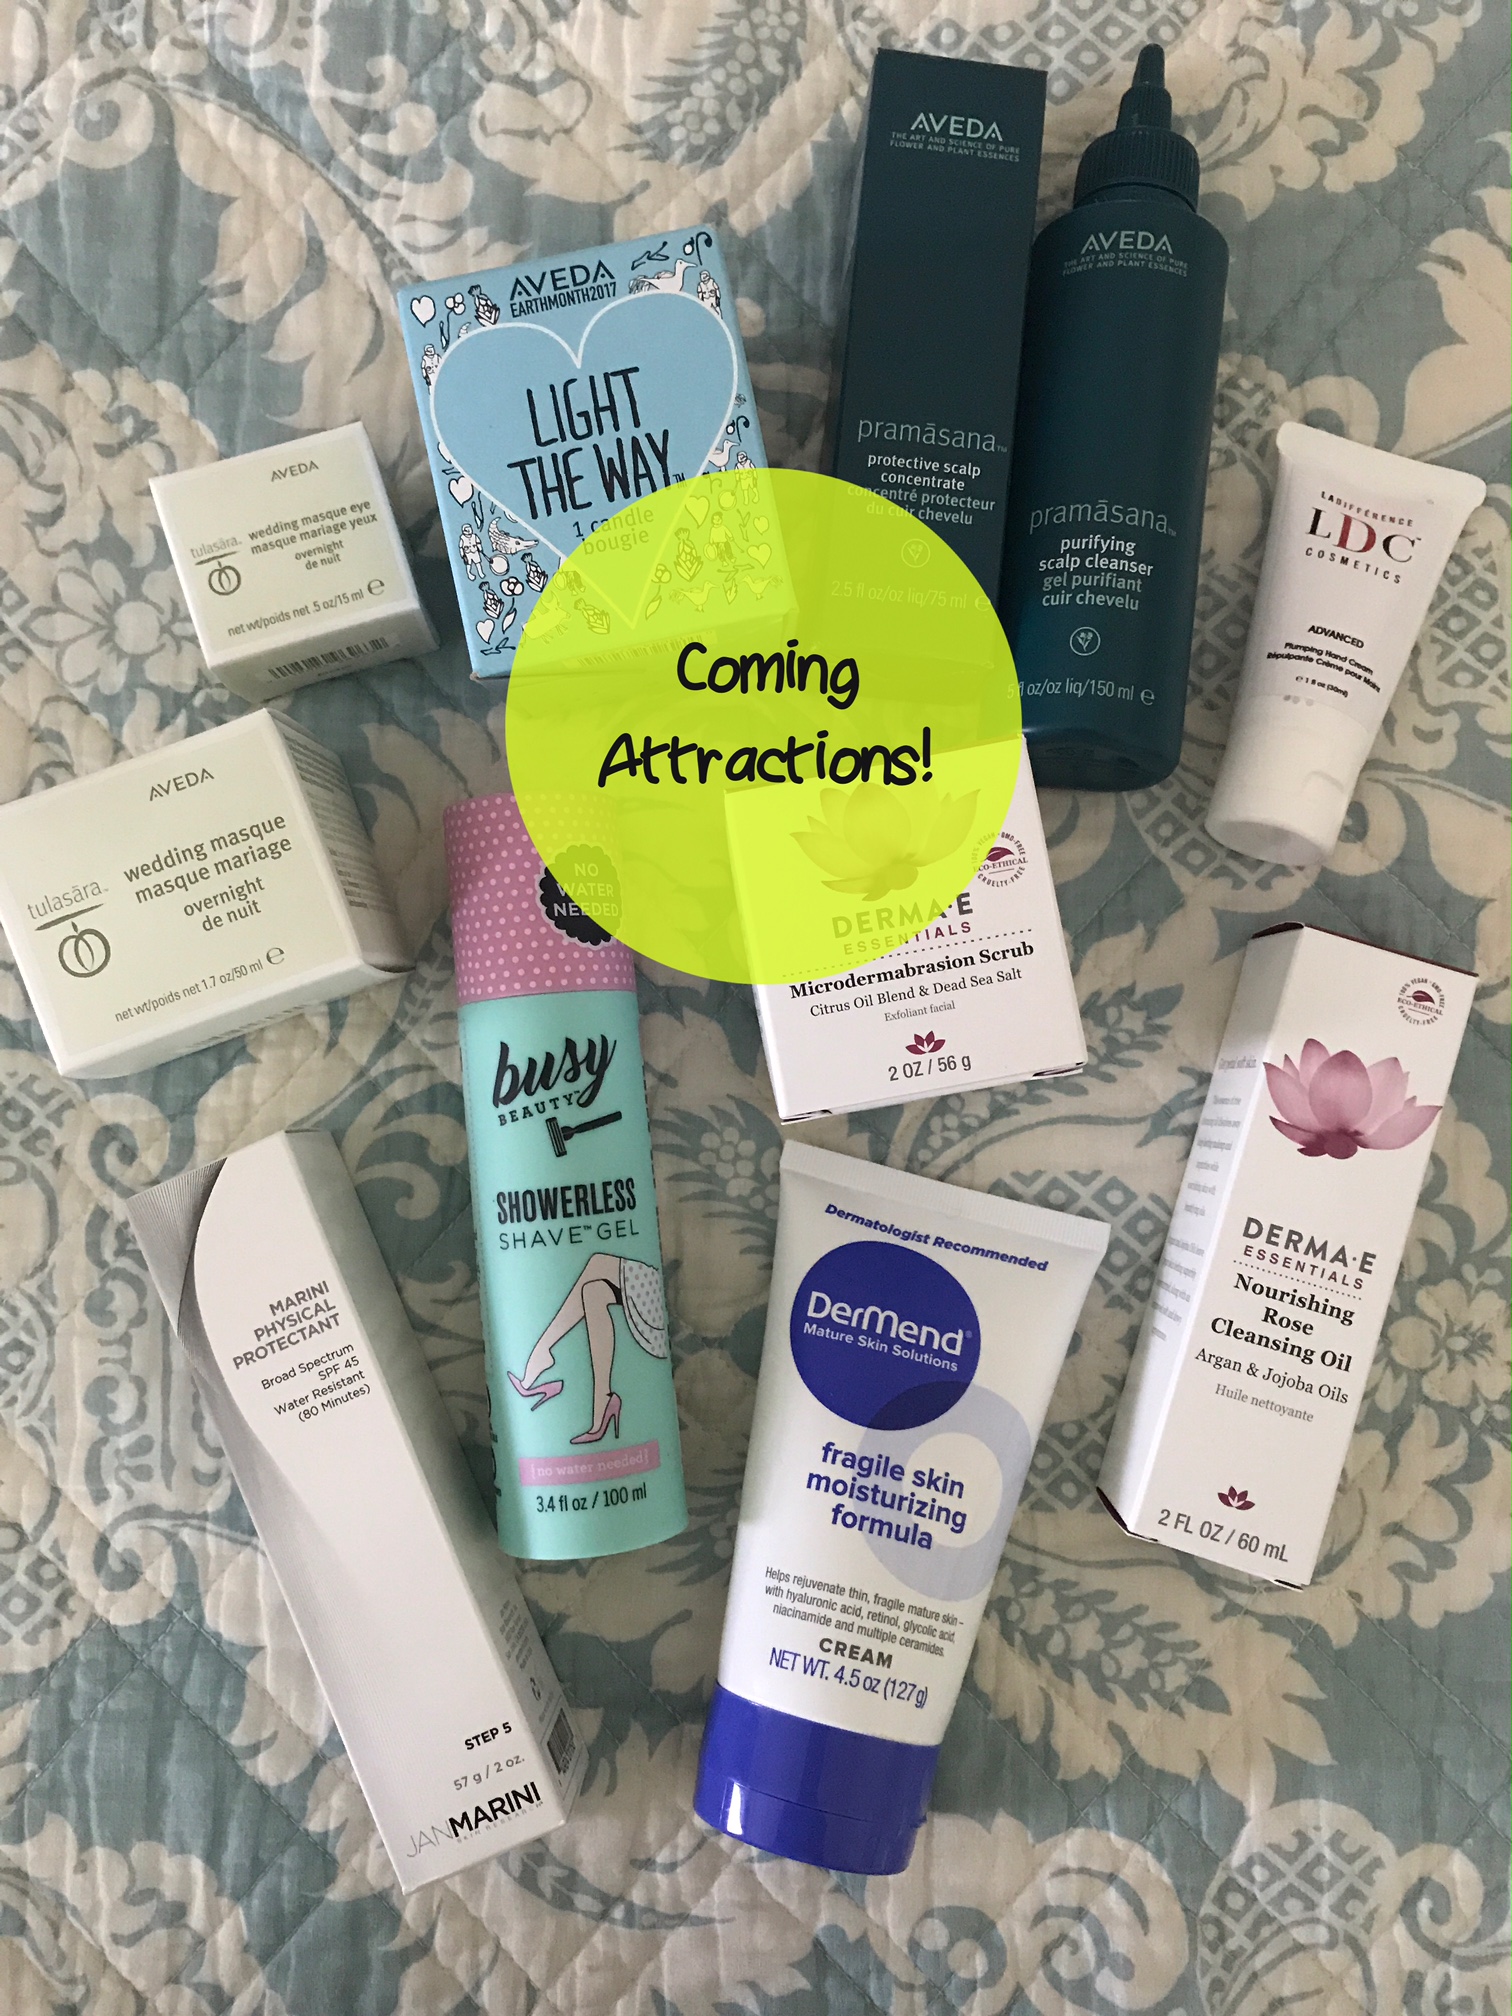 coming attractions: new skincare products I'll be trying for review, neversaydiebeauty.com